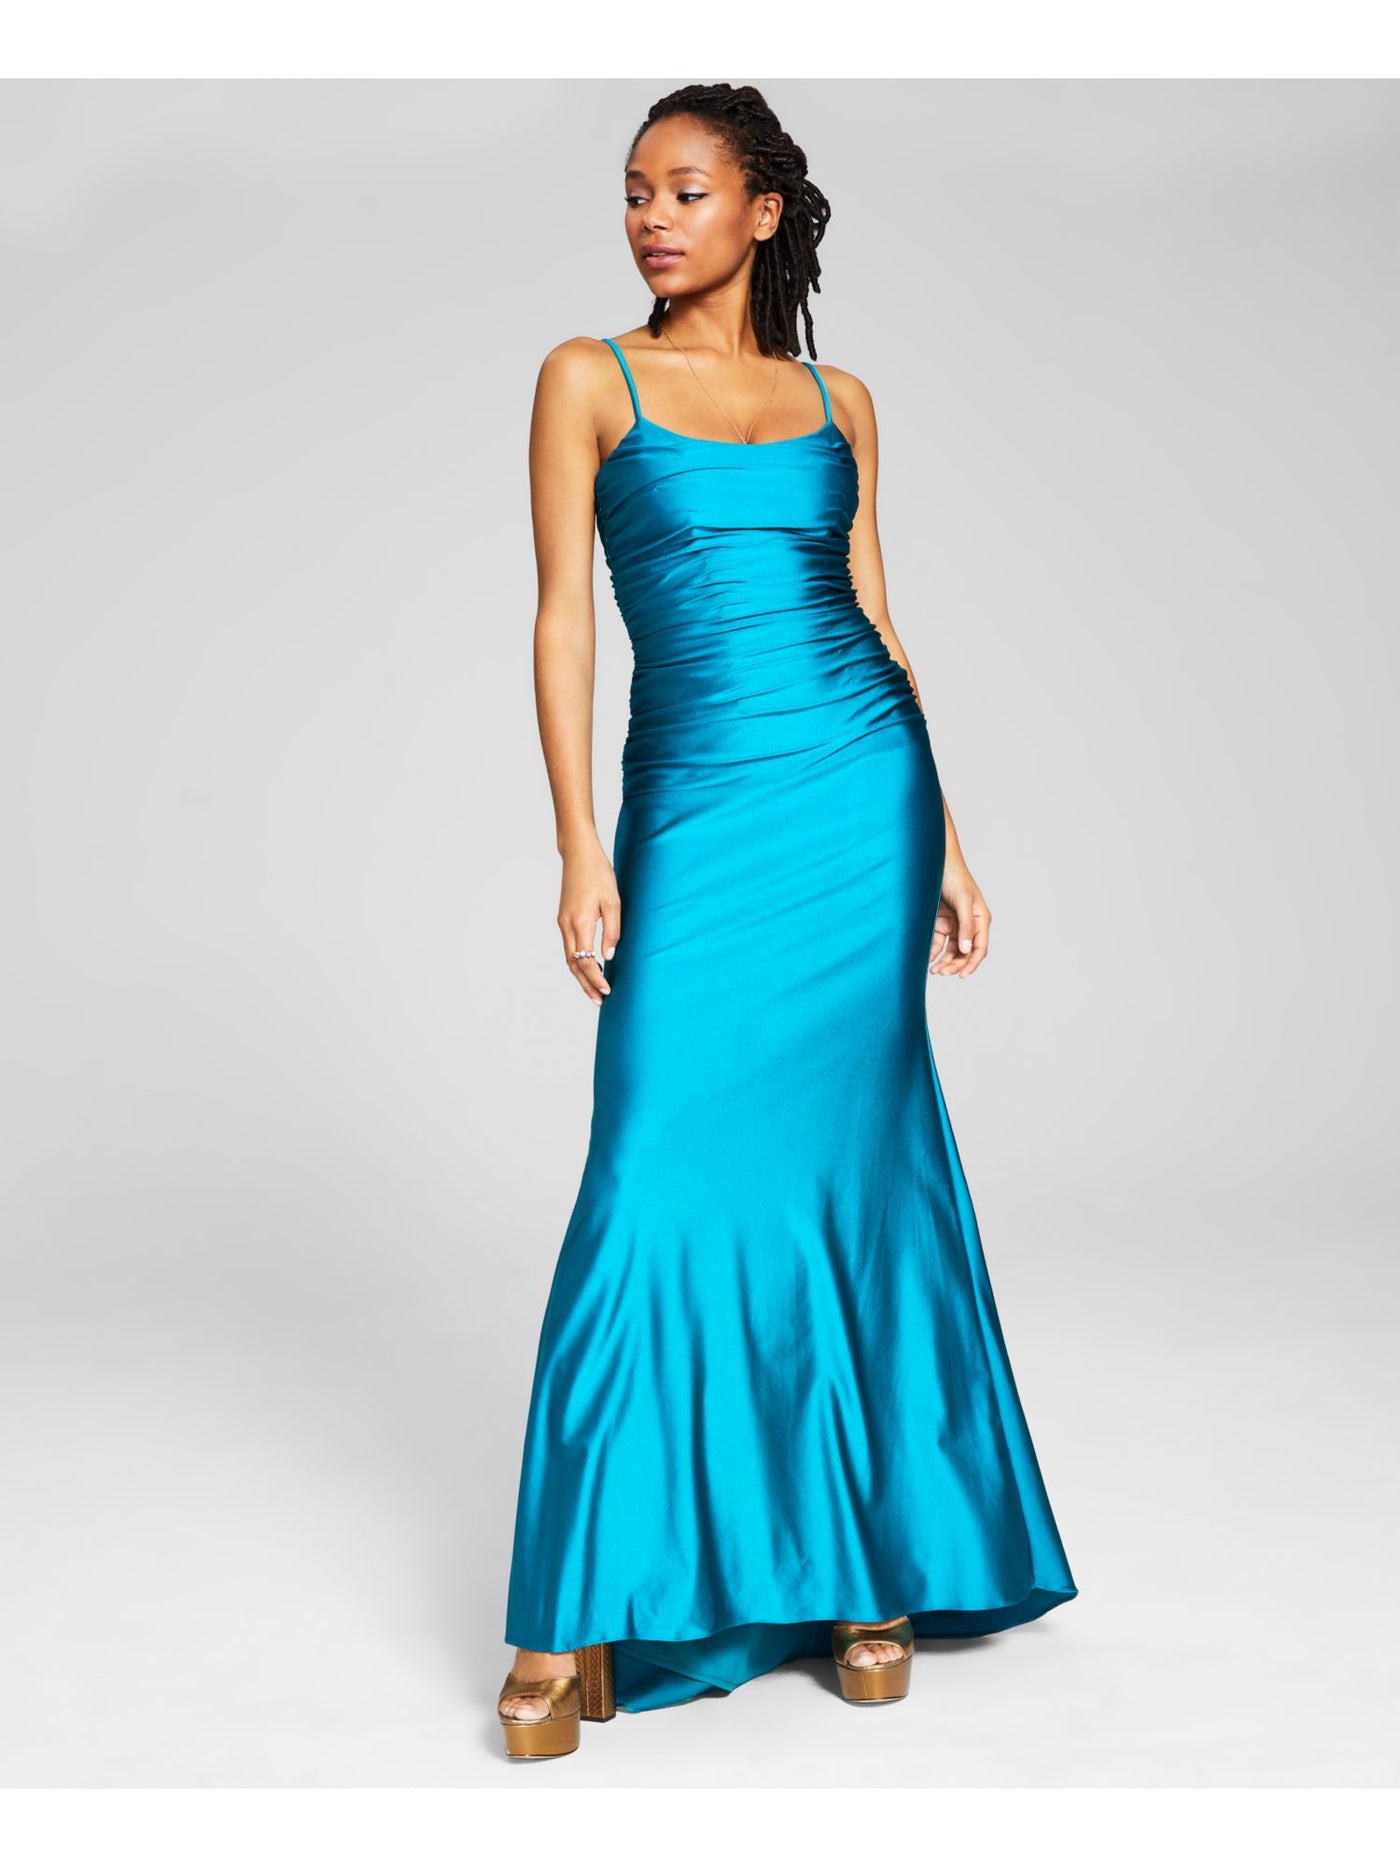 BLONDIE NITES Womens Teal Zippered Ruched Crisscross Strappy Back Spaghetti Strap Scoop Neck Full-Length Formal Gown Dress Juniors 15